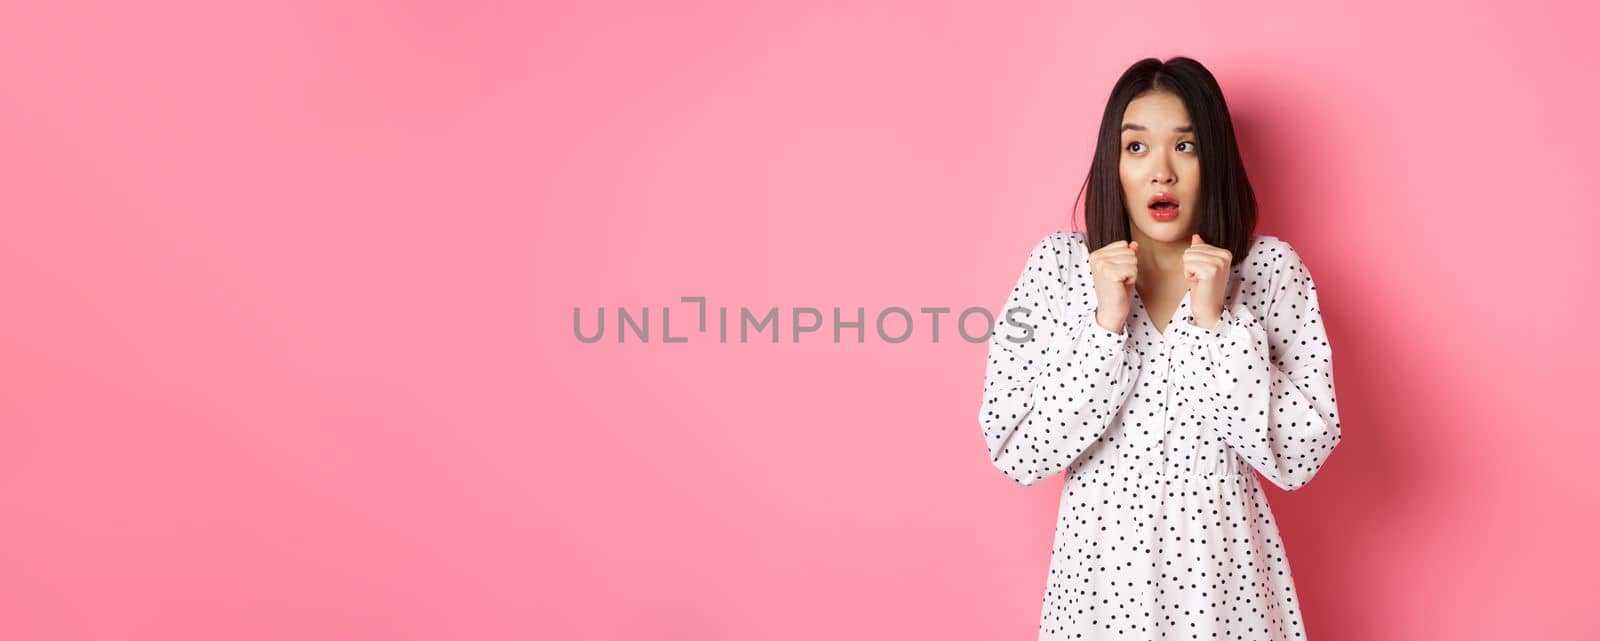 Scared and timid asian girl trembling from fear, staring left and gasping, standing in dress over pink background.